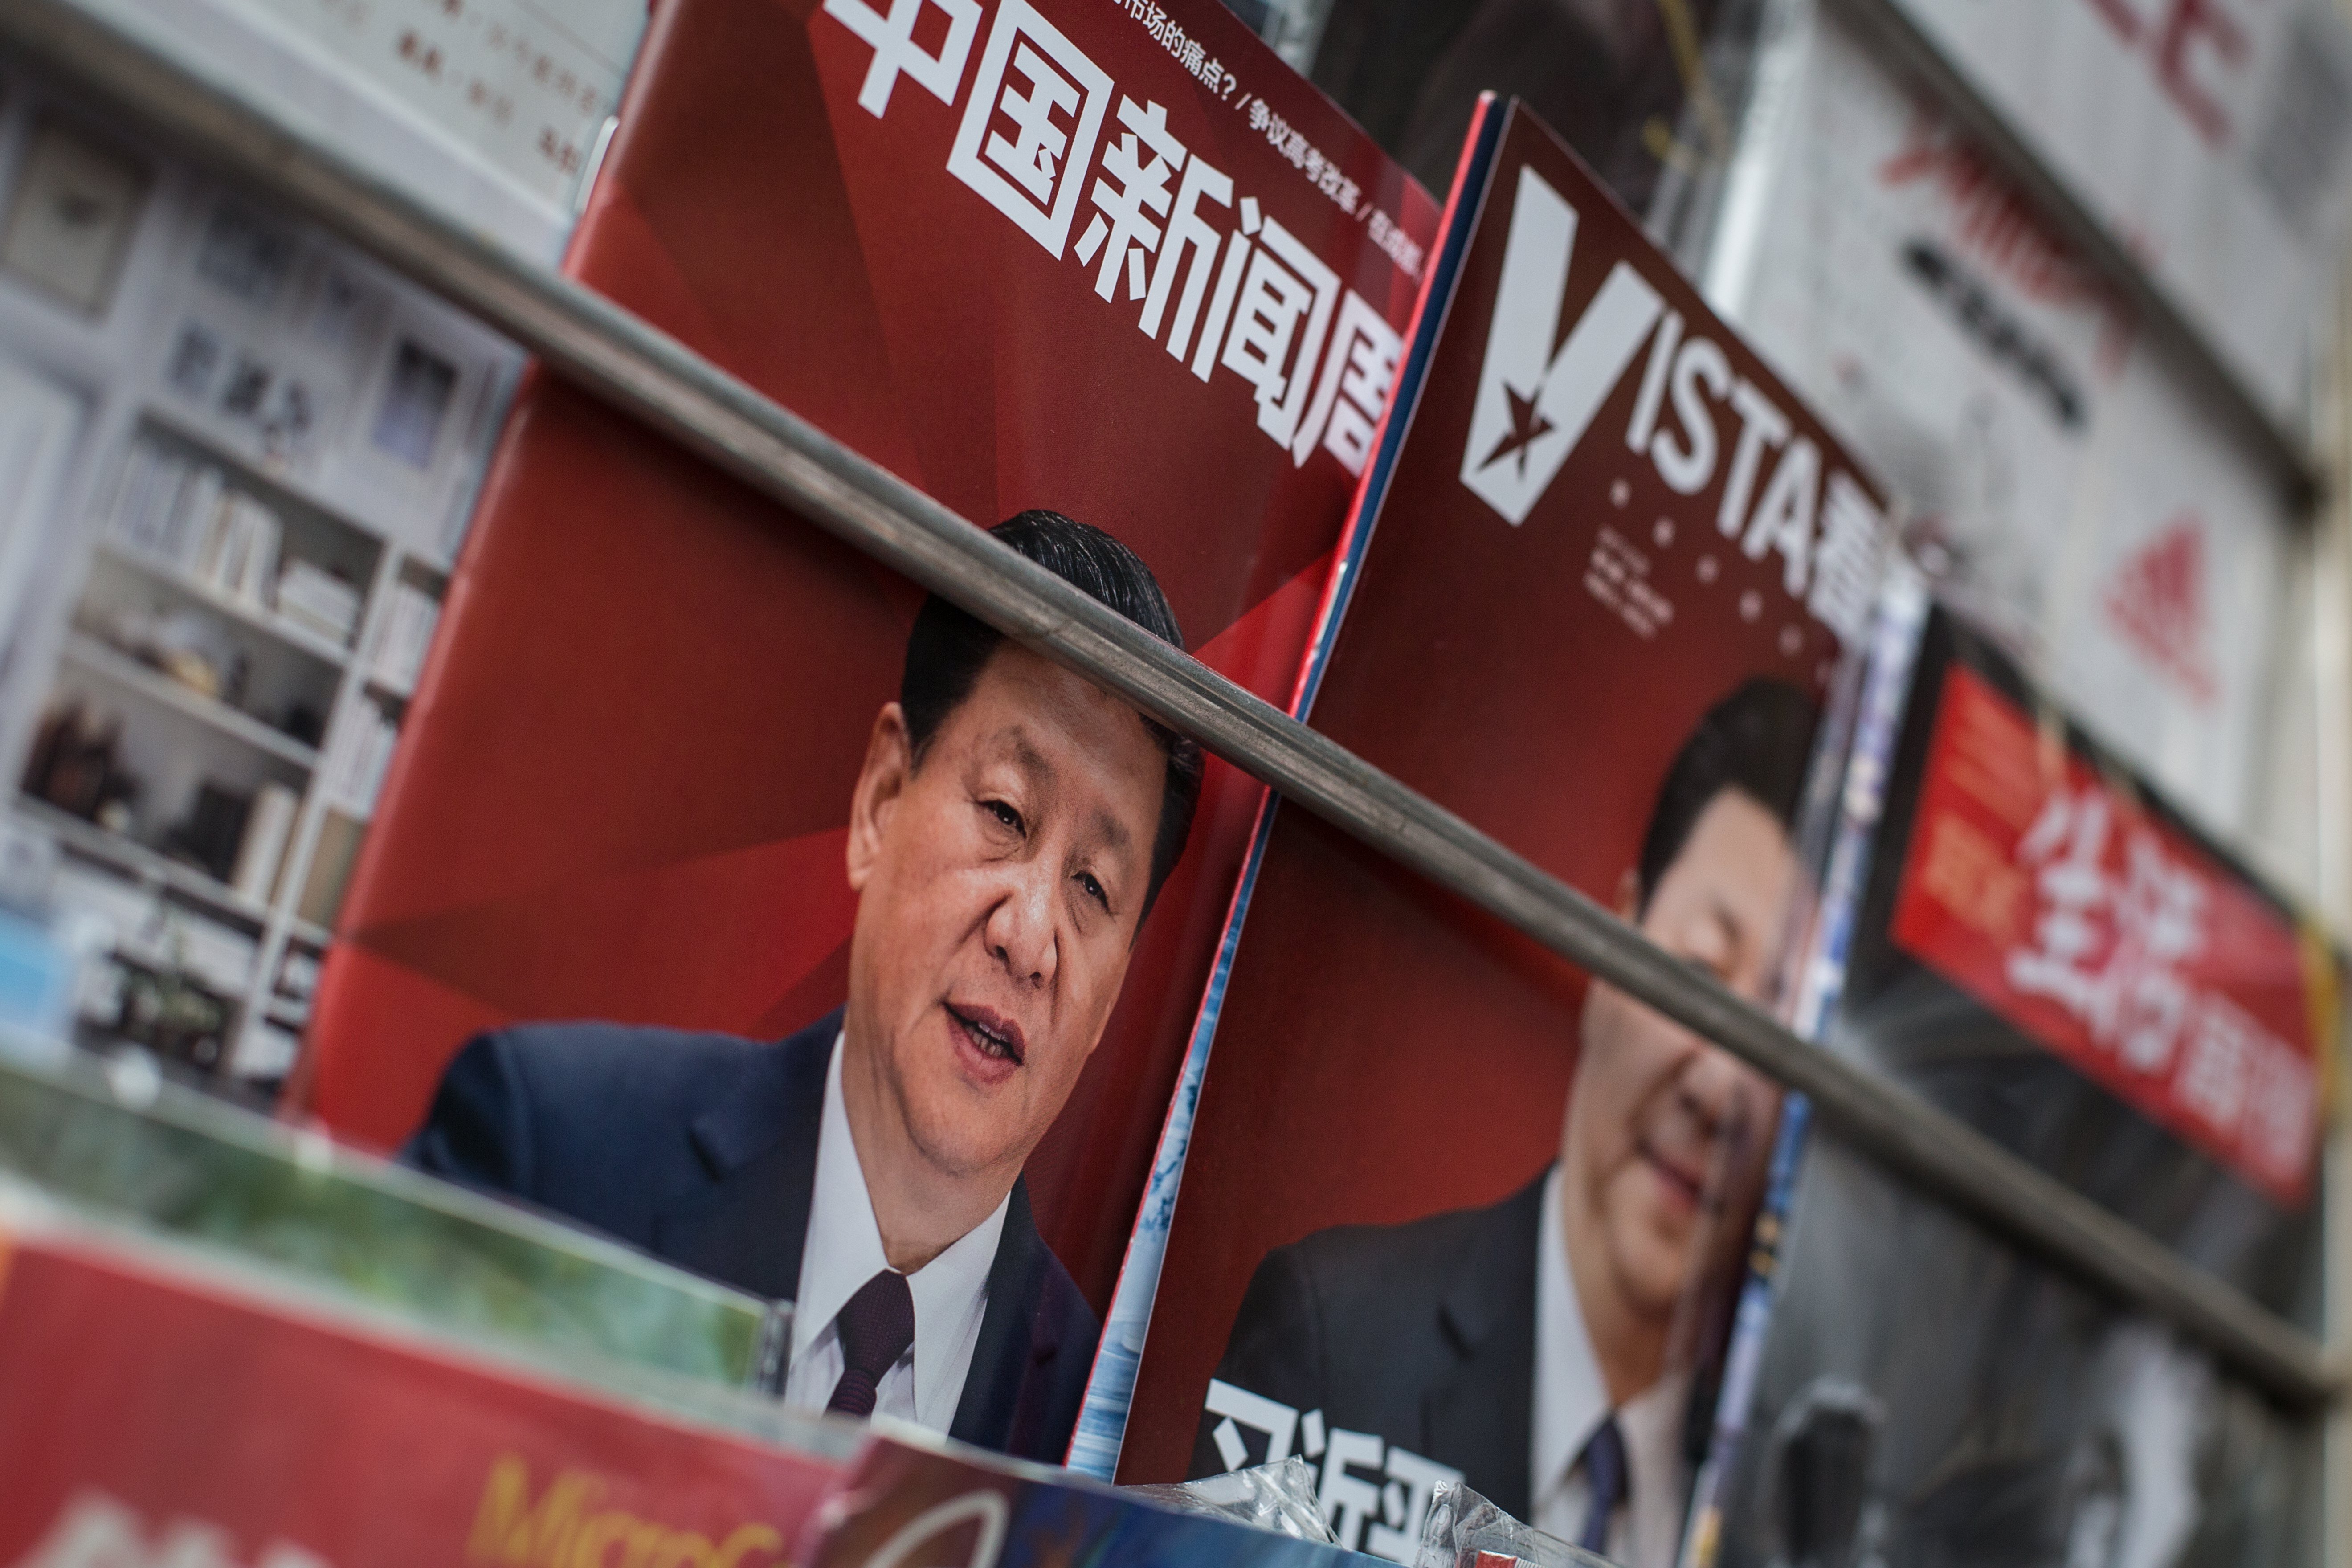 The front cover of magazines showing Chinese President Xi Jinping are placed for sale at a newspaper stall in Beijing. Photo: EPA